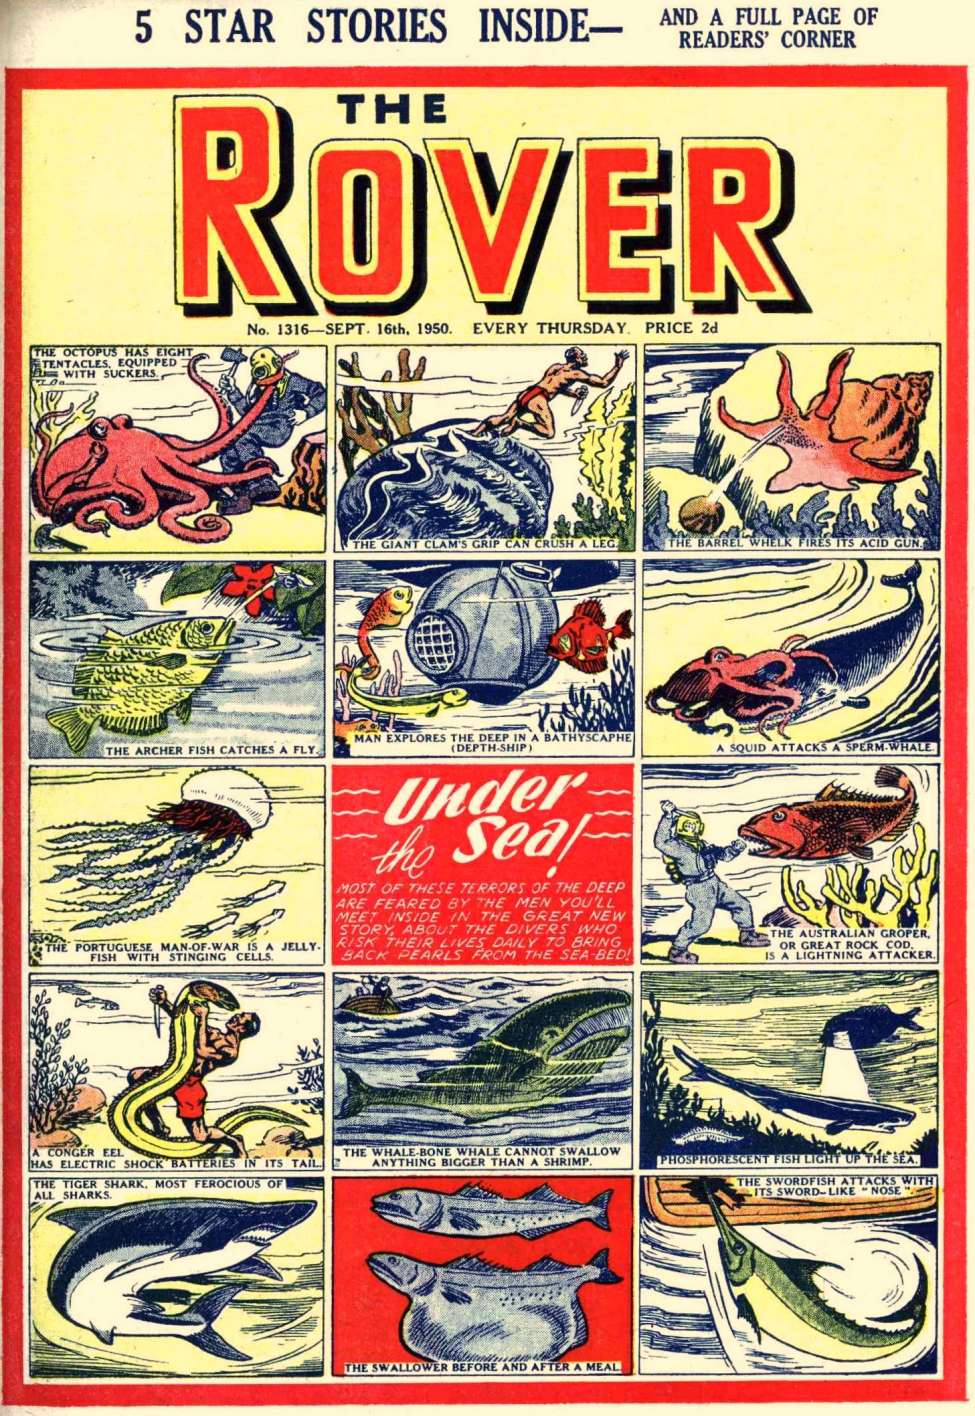 Book Cover For The Rover 1316